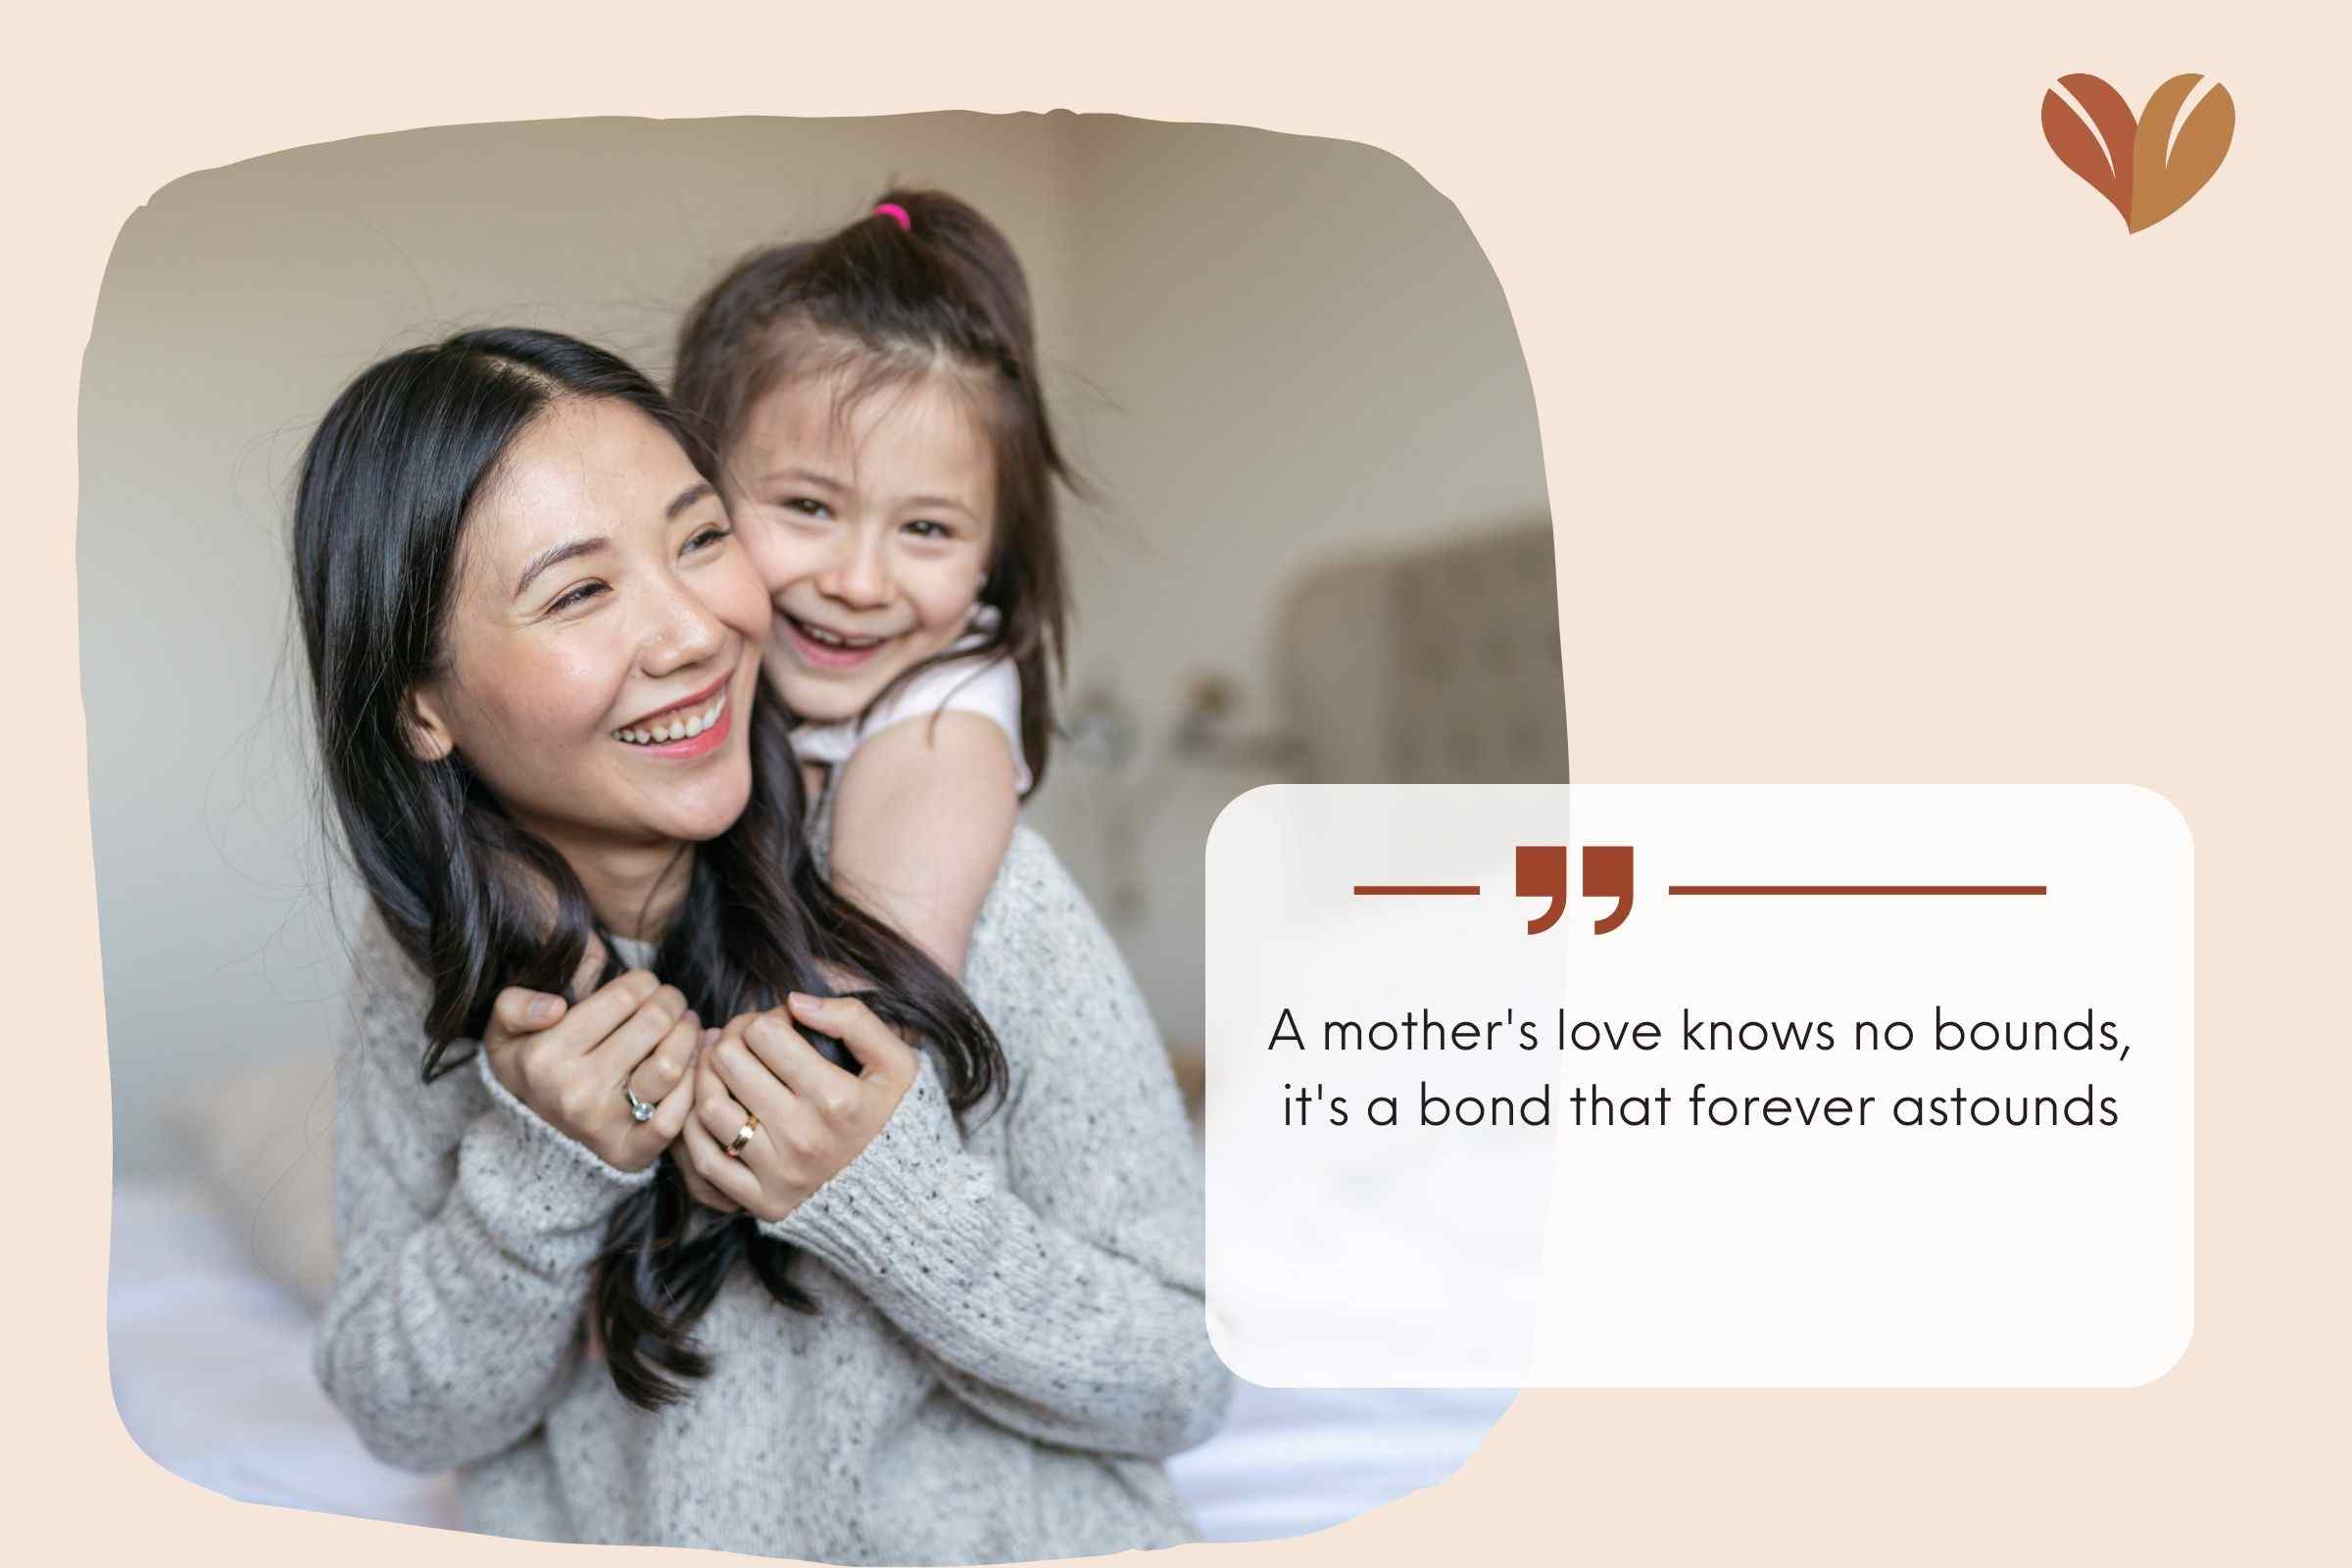 Instagram captions for mom and daughter - A mother's love knows no bounds, it's a bond that forever astounds